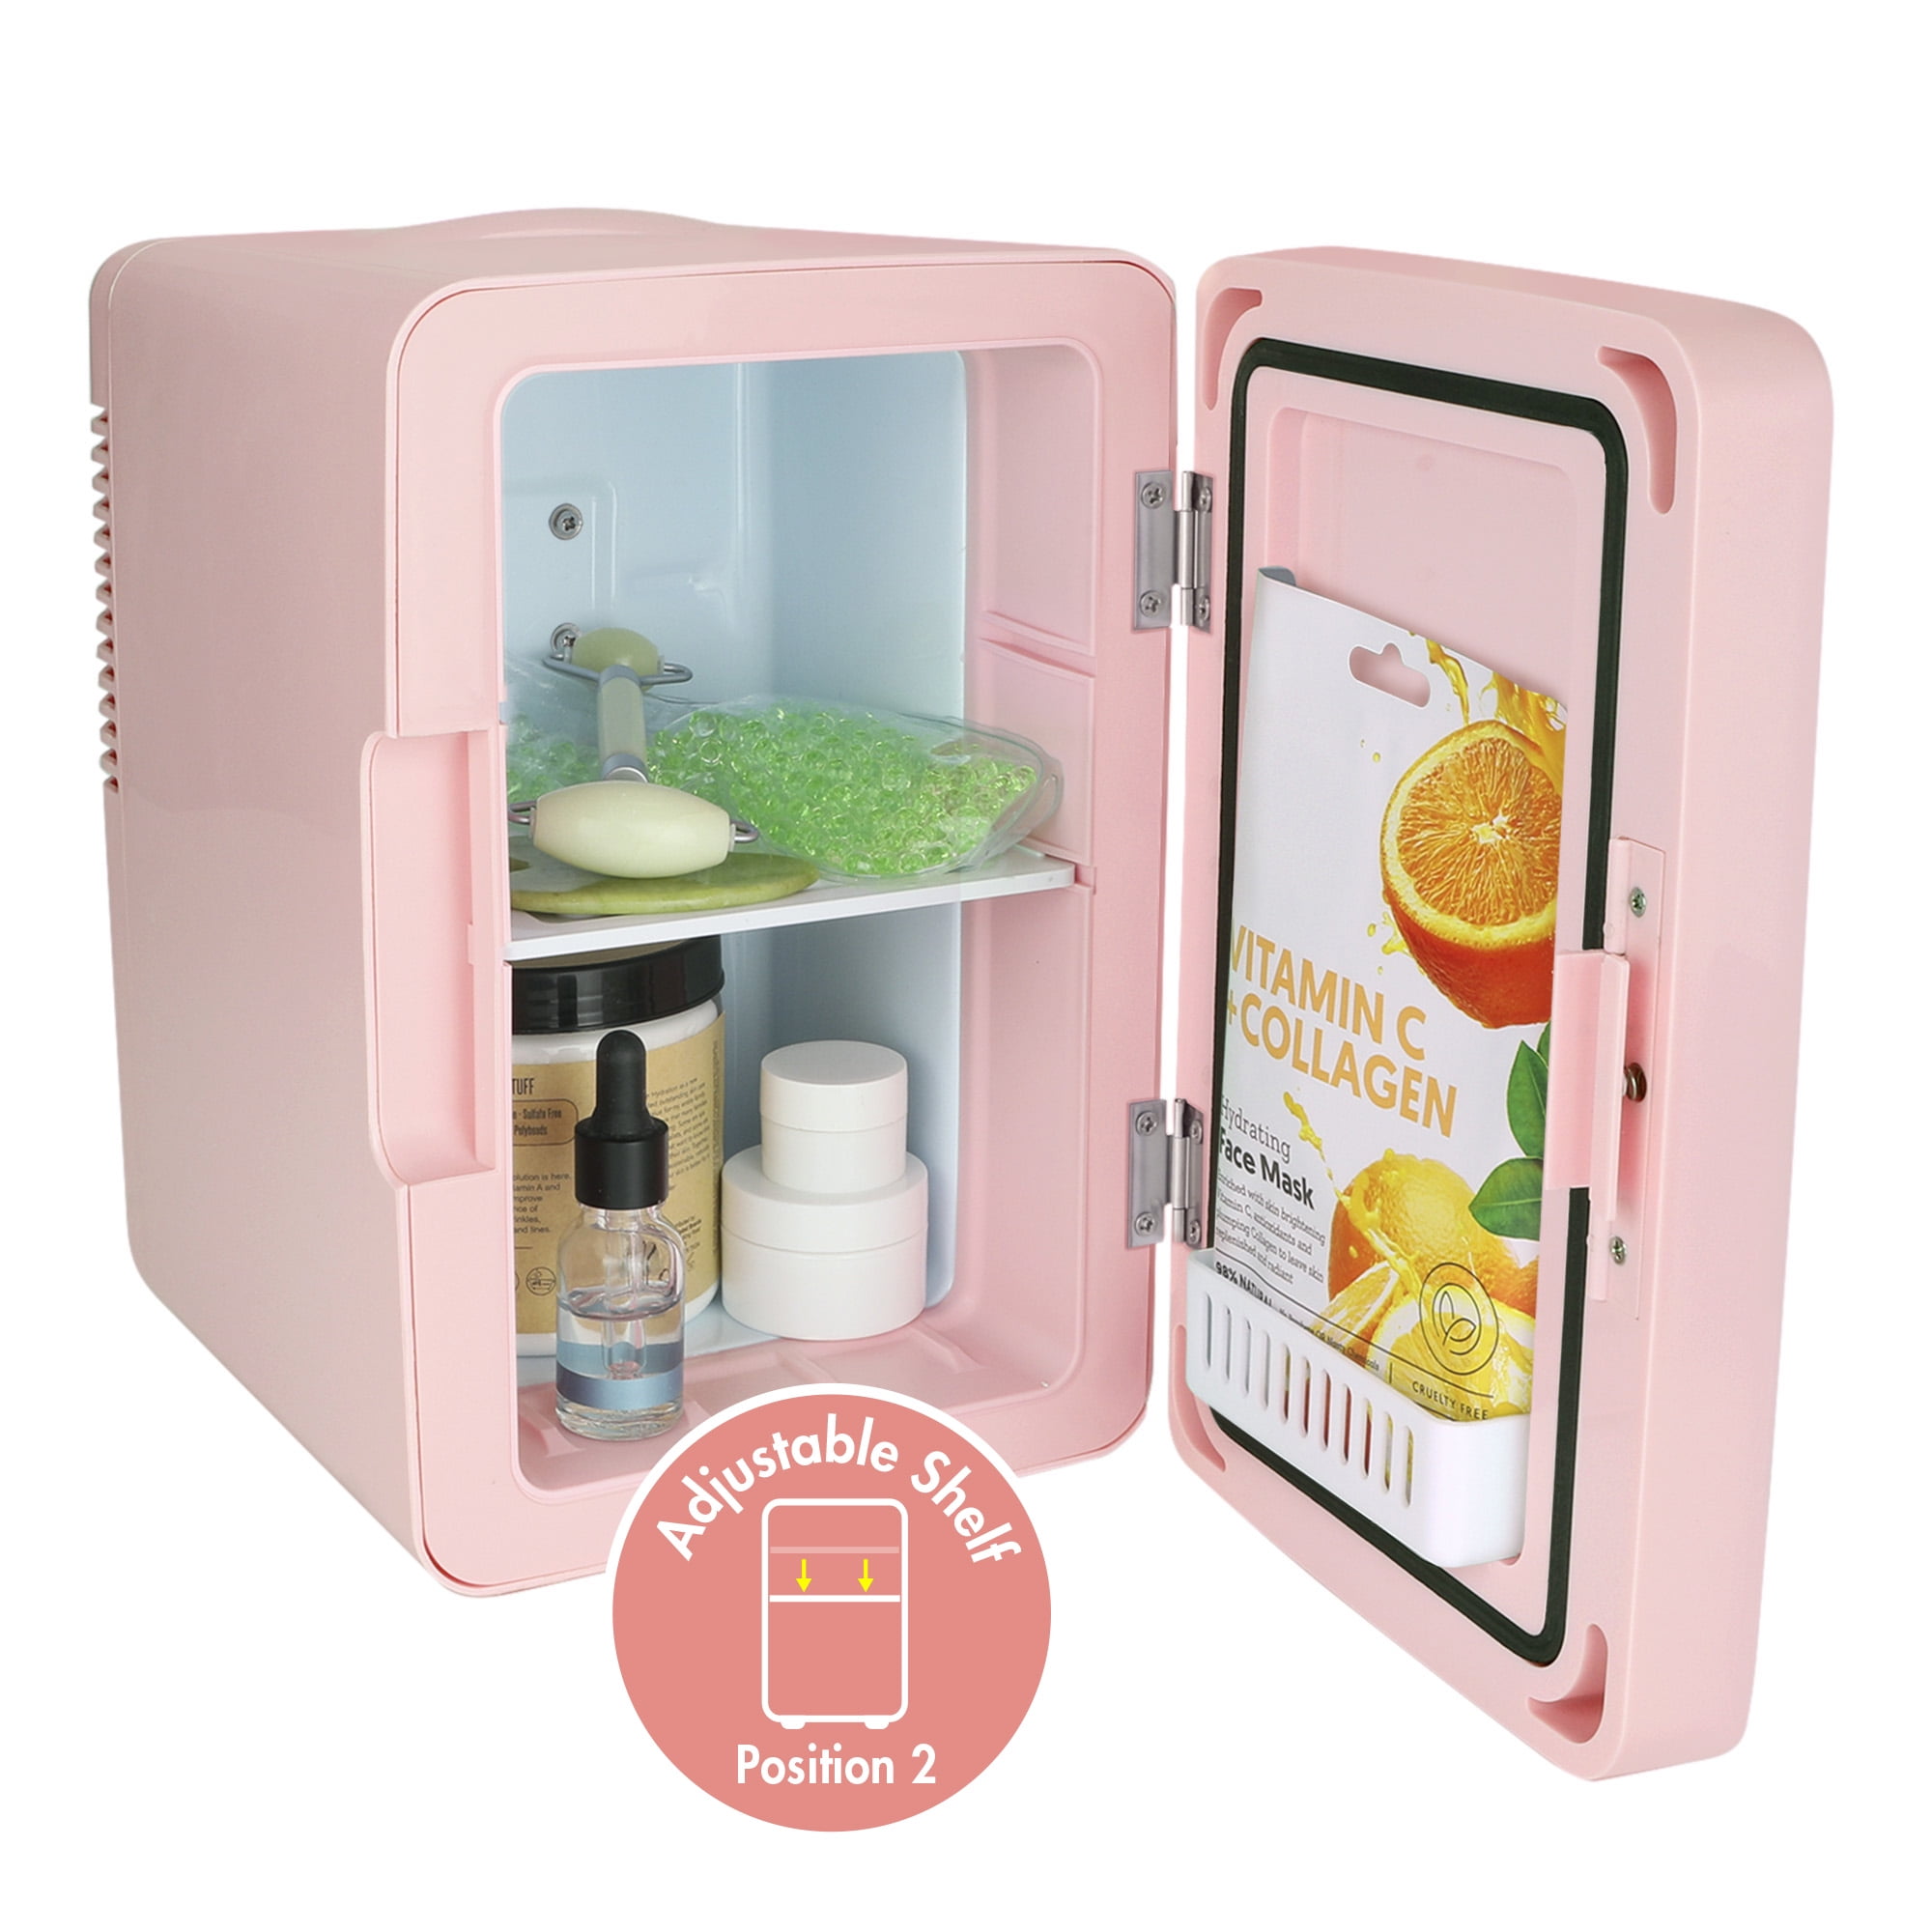 Ciro skive support Personal Chiller LED Lighted Mini Fridge with Mirror Door, Coral -  Walmart.com